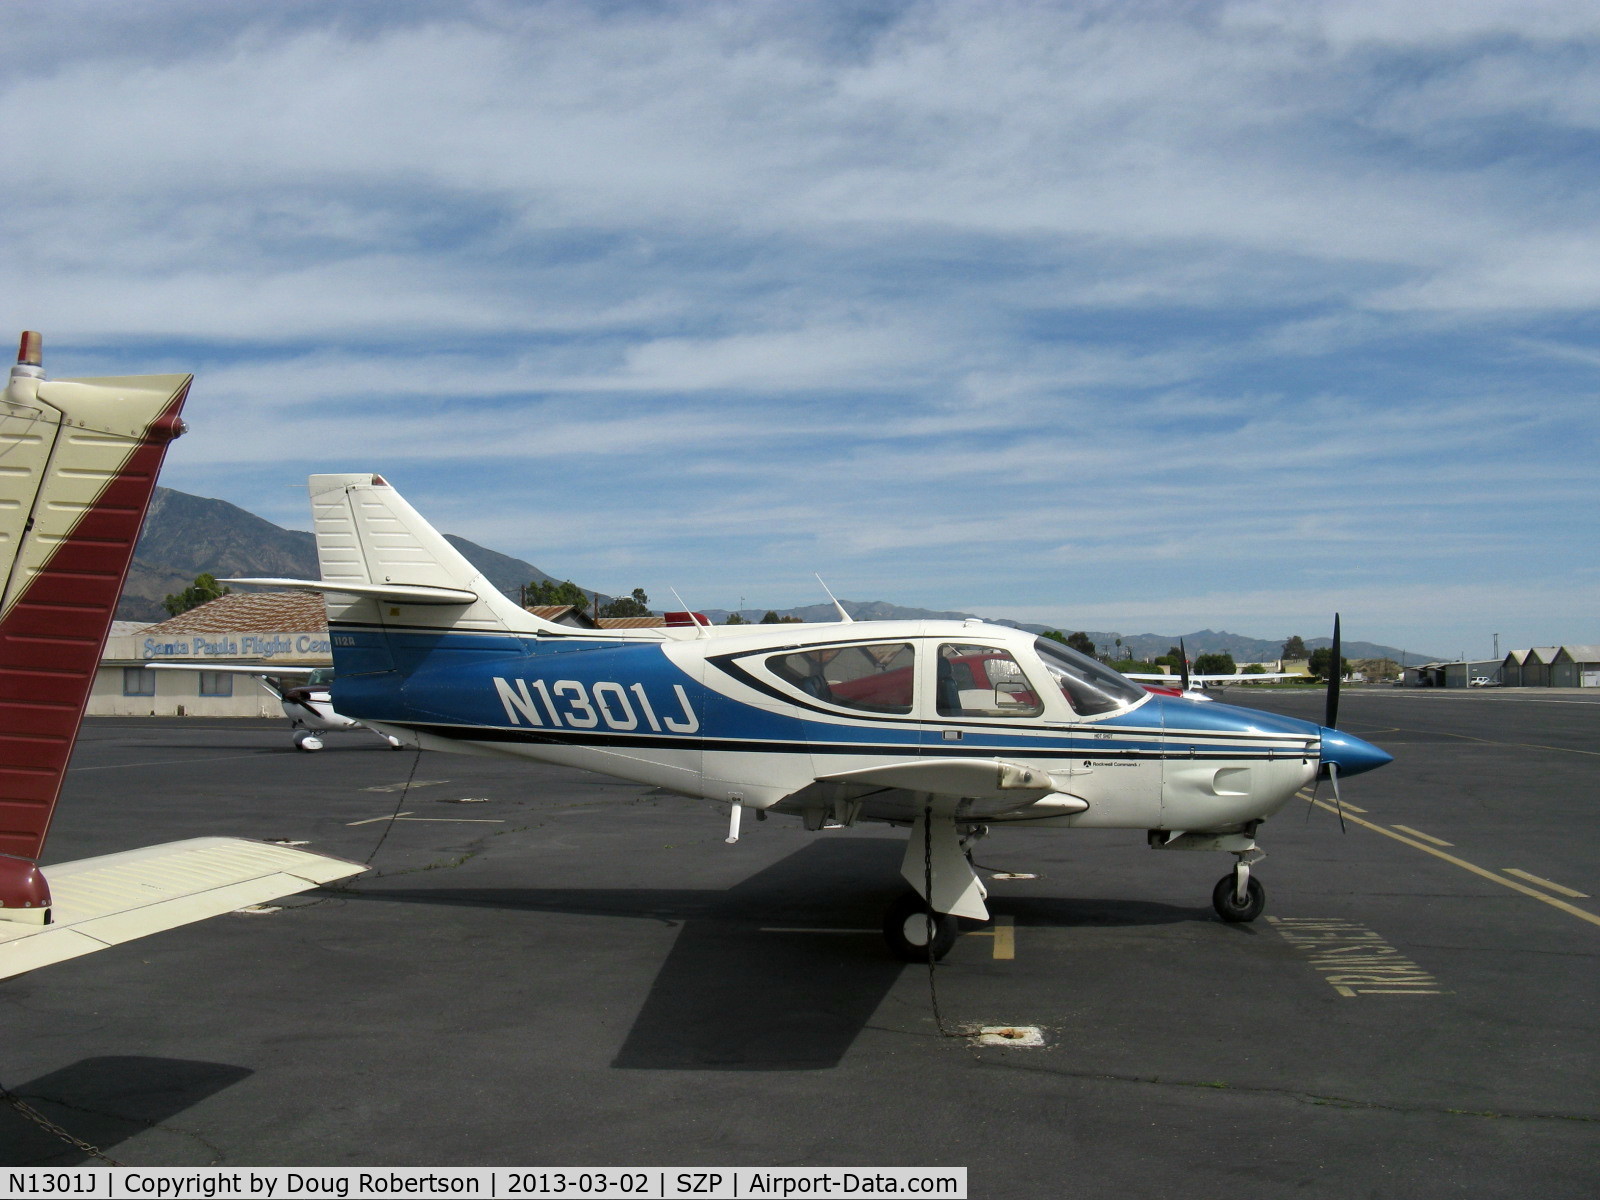 N1301J, 1975 Rockwell International 112A Commander C/N 301, 1975 Rockwell COMMANDER 112A 'HOTSHOT', Lycoming IO-360-C1D6 200 Hp, a modern competitive design with good ergonomics for pilot and passengers